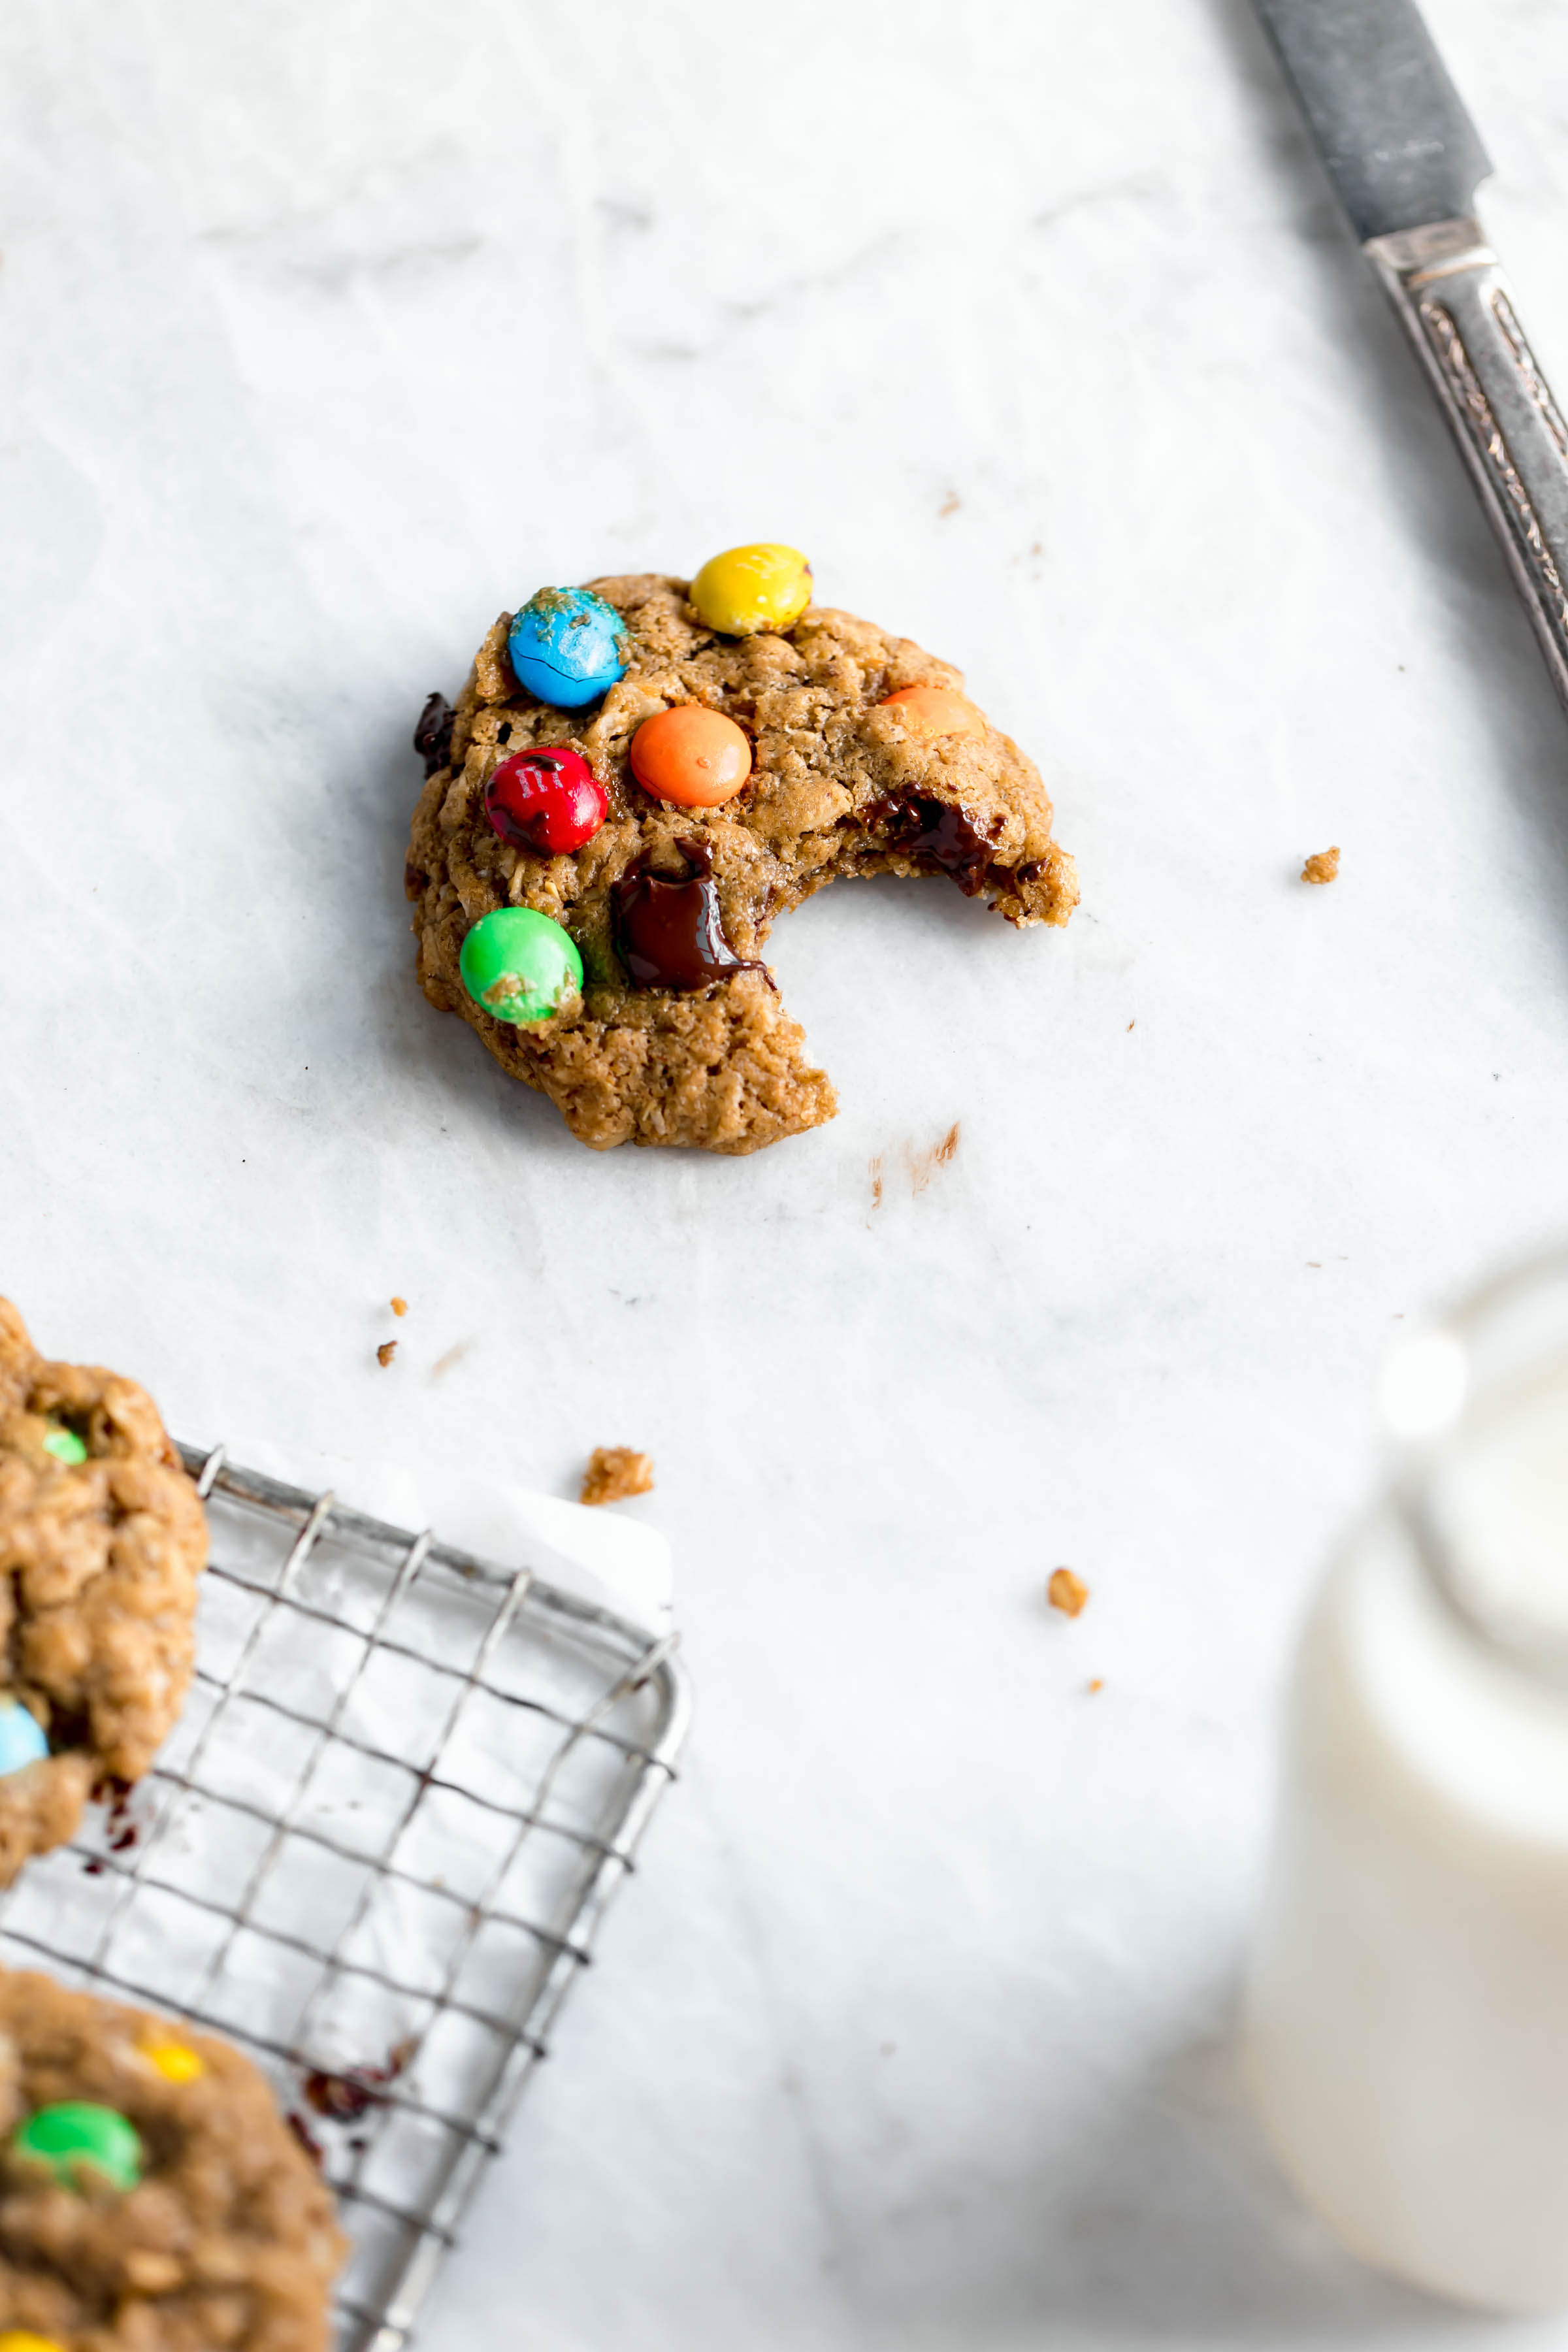 Healthier monster cookies made with peanut butter, coconut oil, maple syrup and old fashioned oats. And of course chocolate and m and ms.